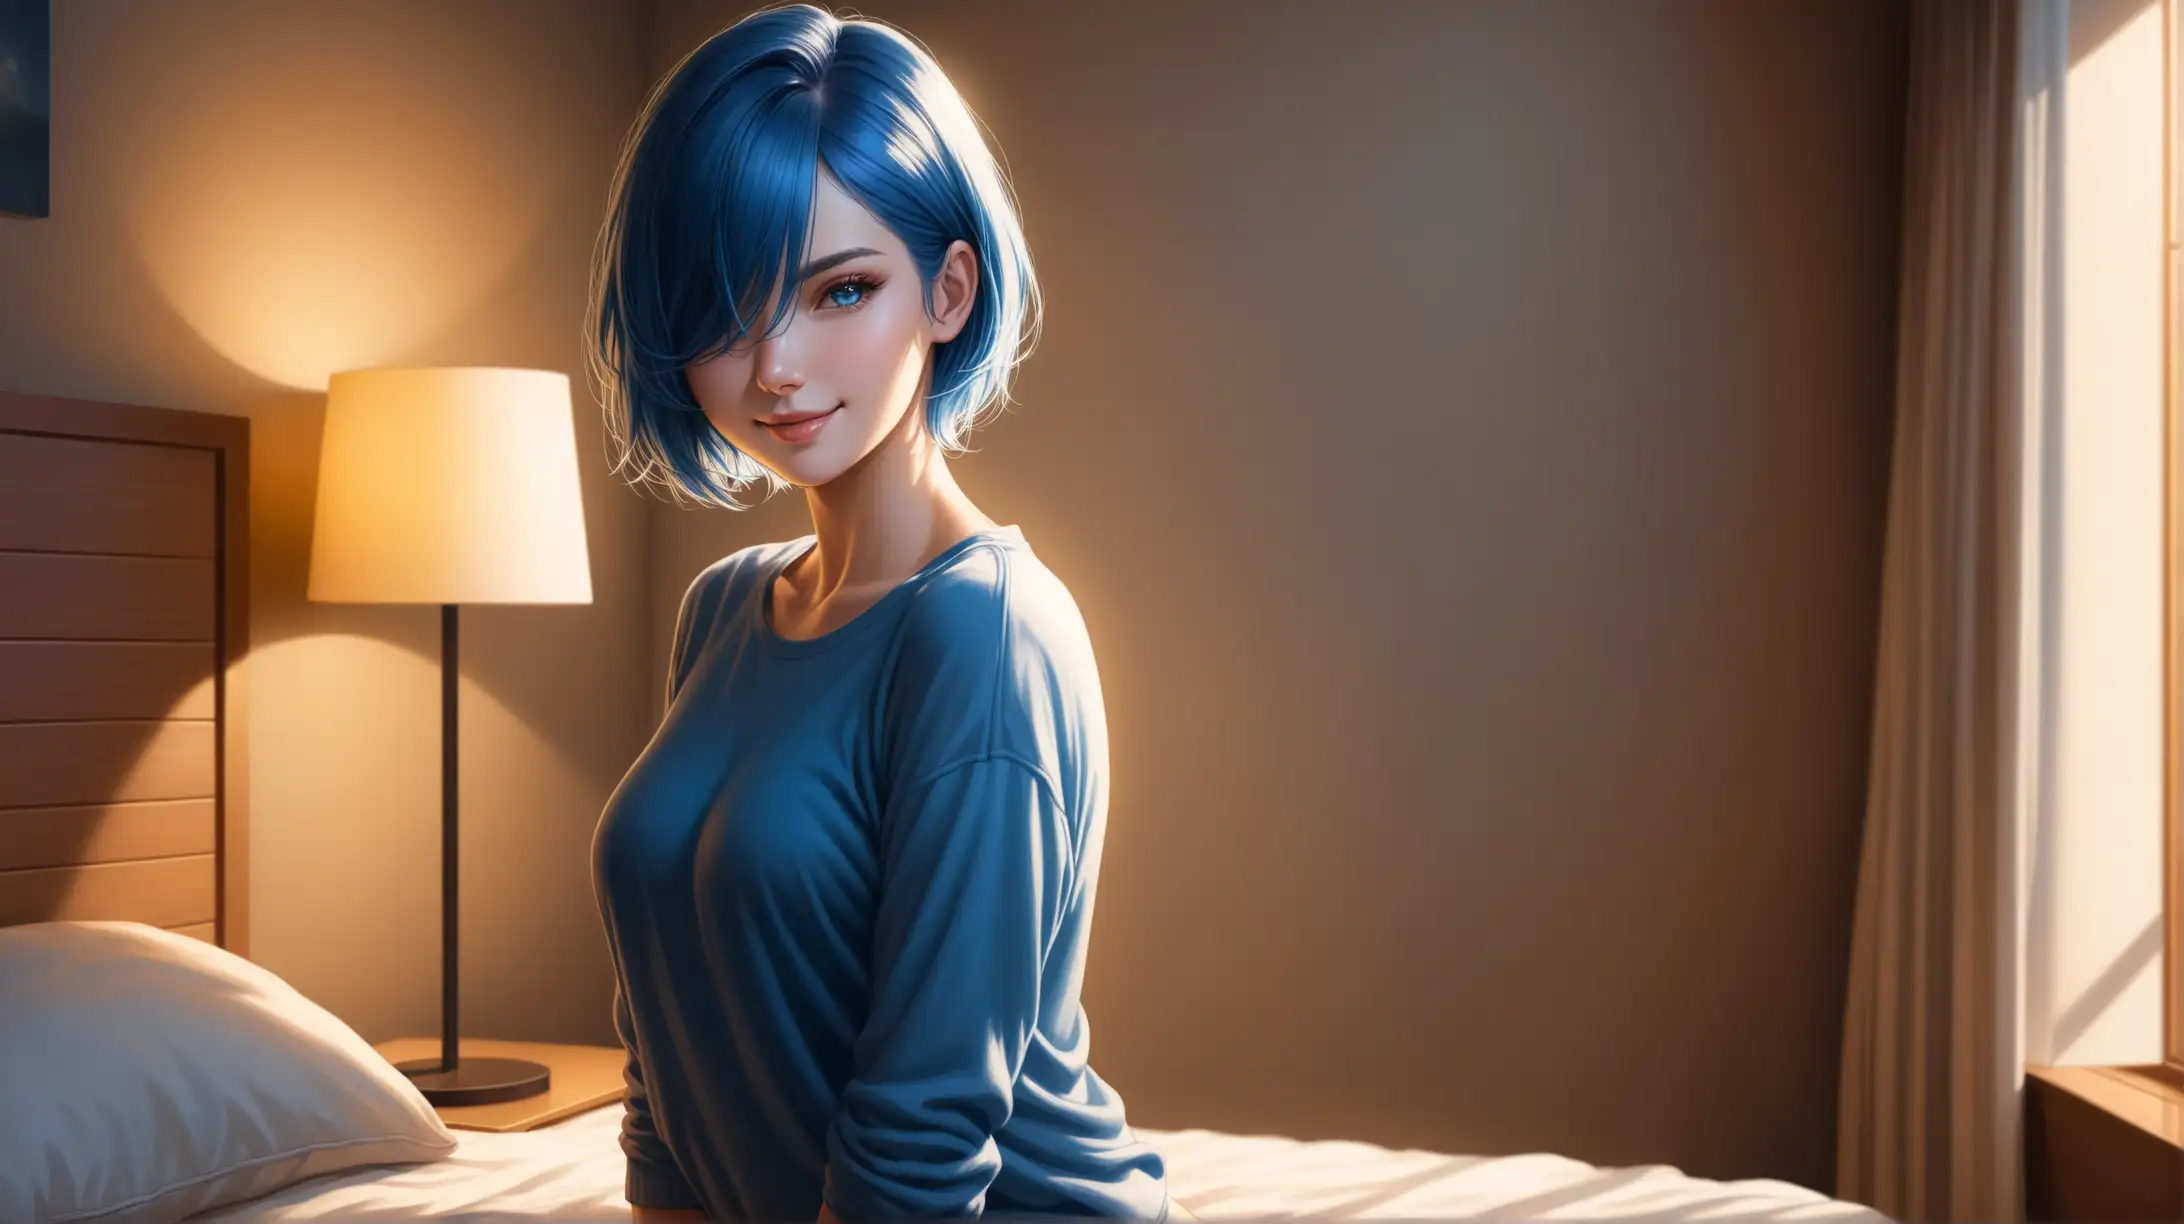 Seductive Woman with Blue Hair in Bedroom Ambiance